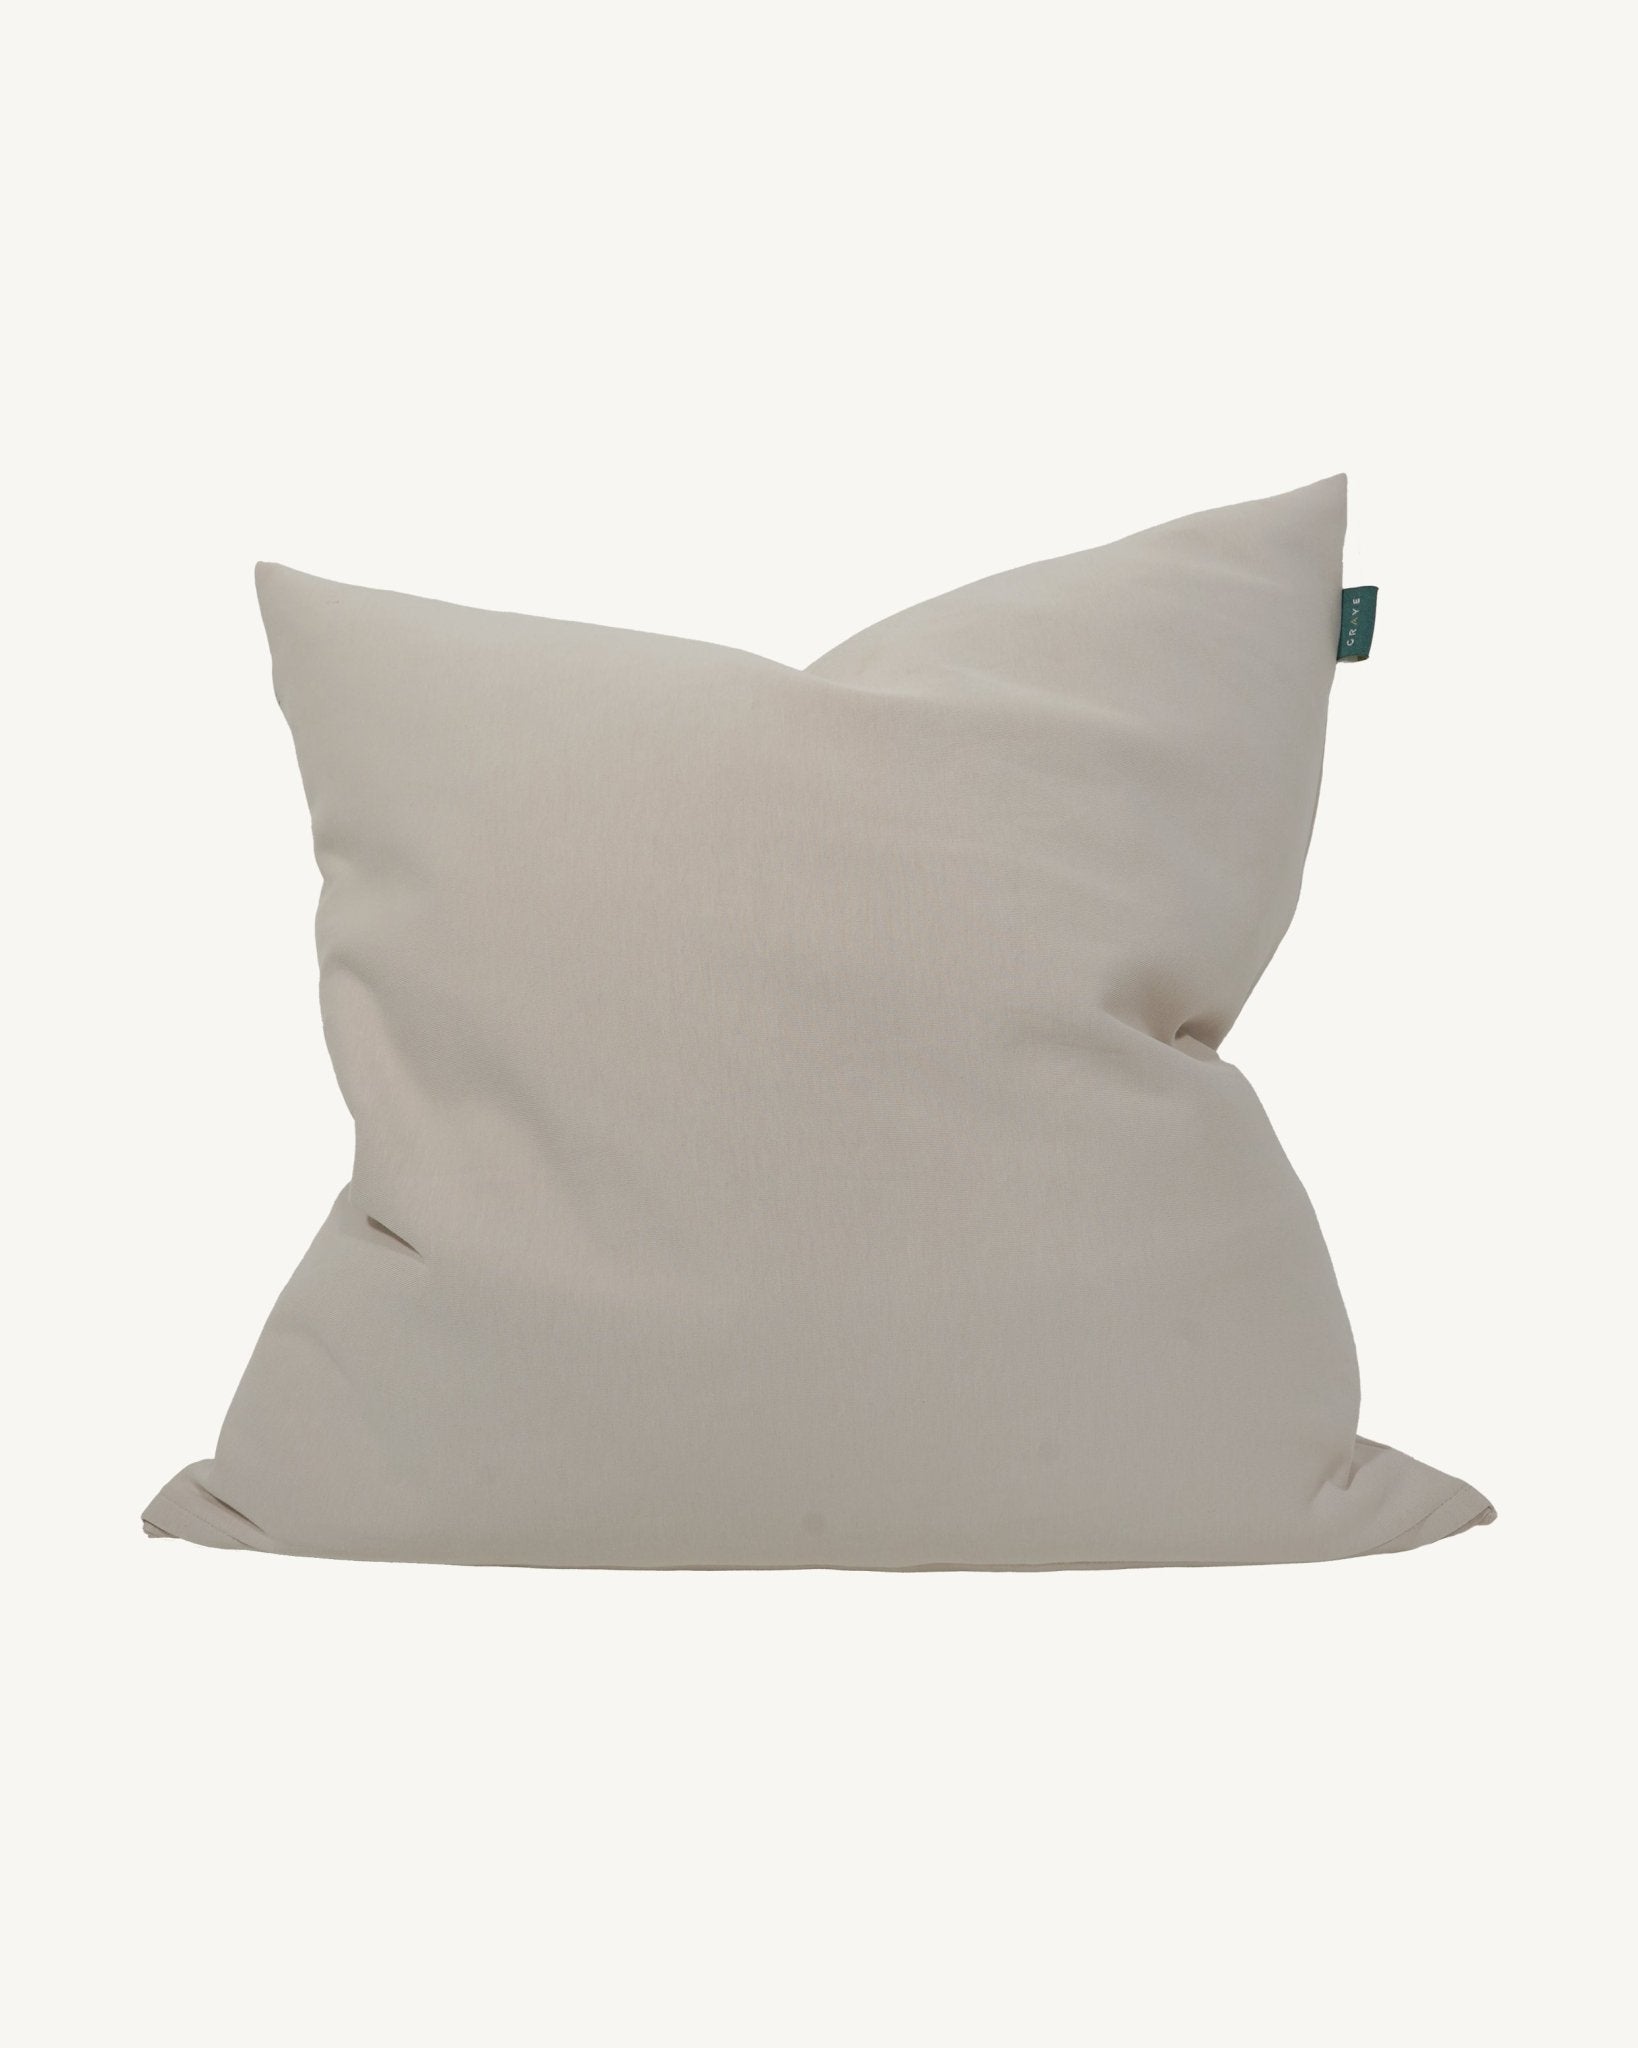 LOUNGE Pillow Cover - G R A Y E